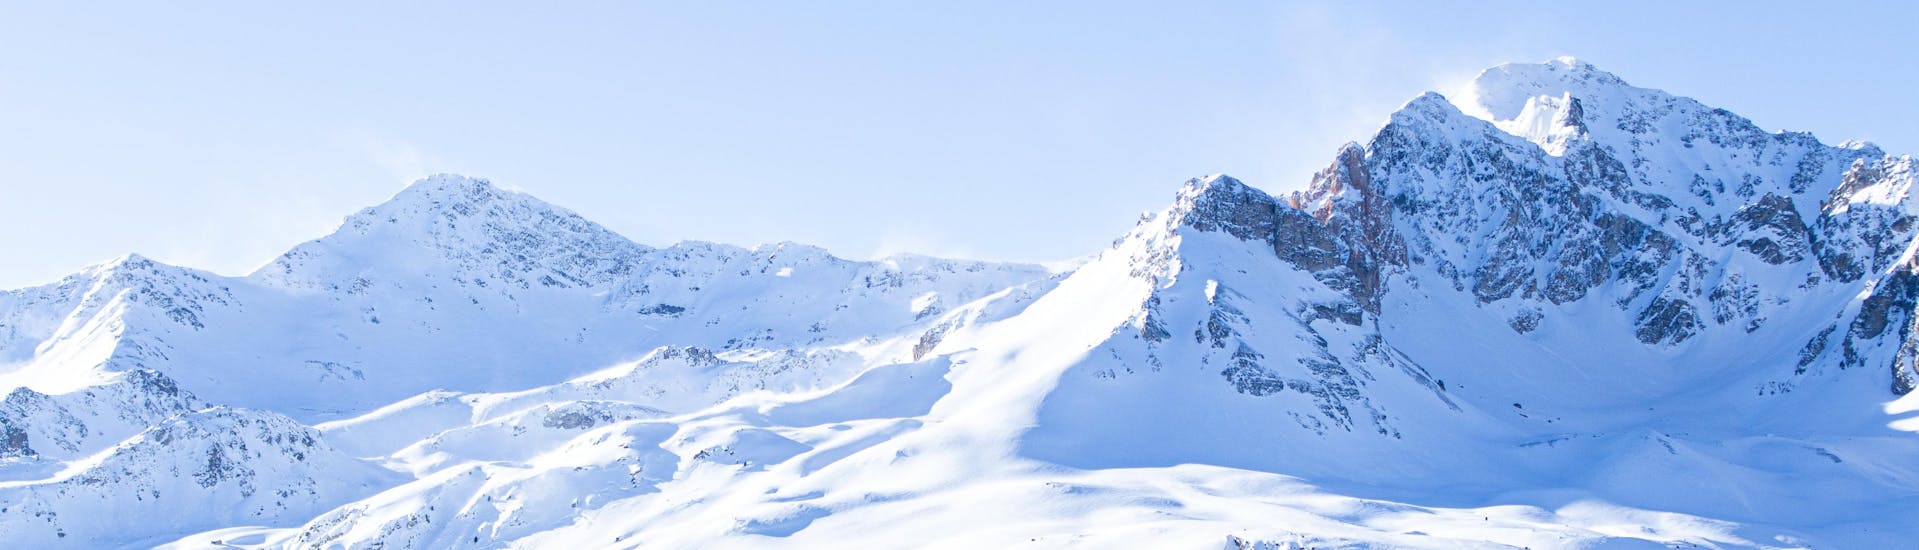 A scenic view of the snow-capped mountains surrouding the French ski resort of Valfréjus where local ski schools offer a large choice of ski lessons.